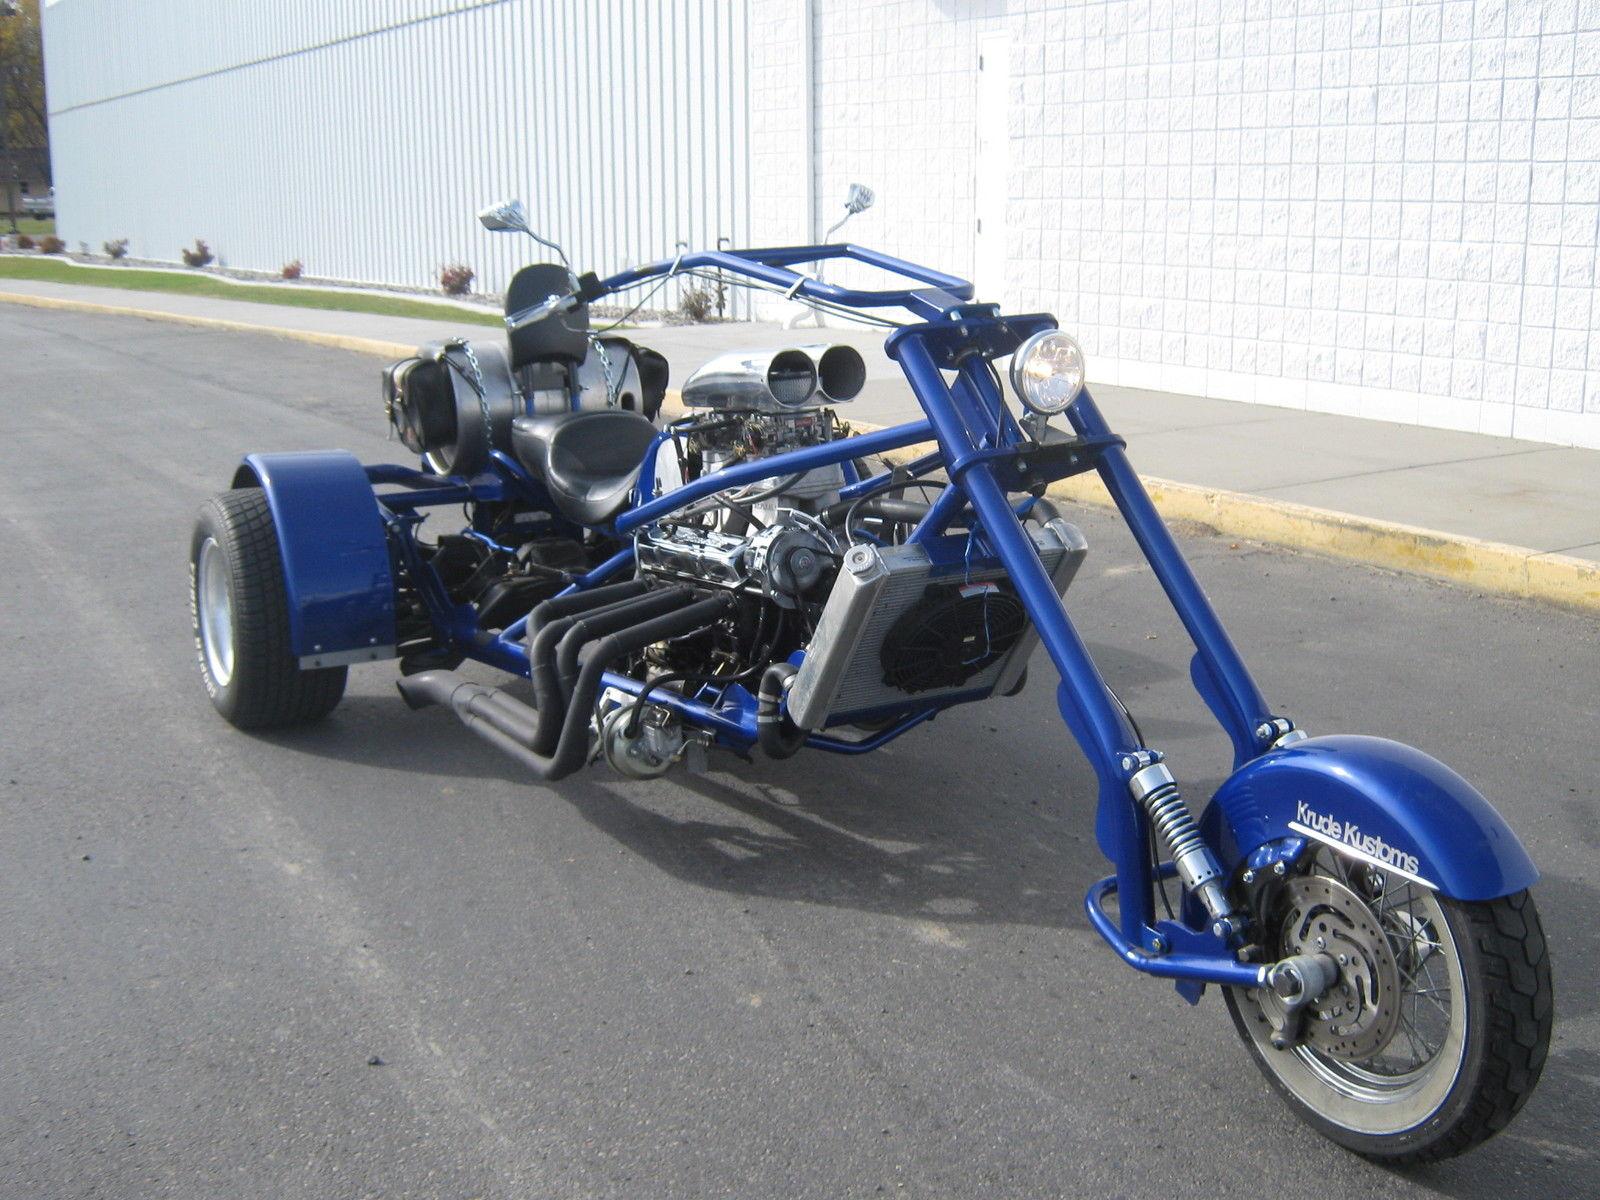 v8 trikes for sale - Online Discount. cheetah v8 trikes for sale. 